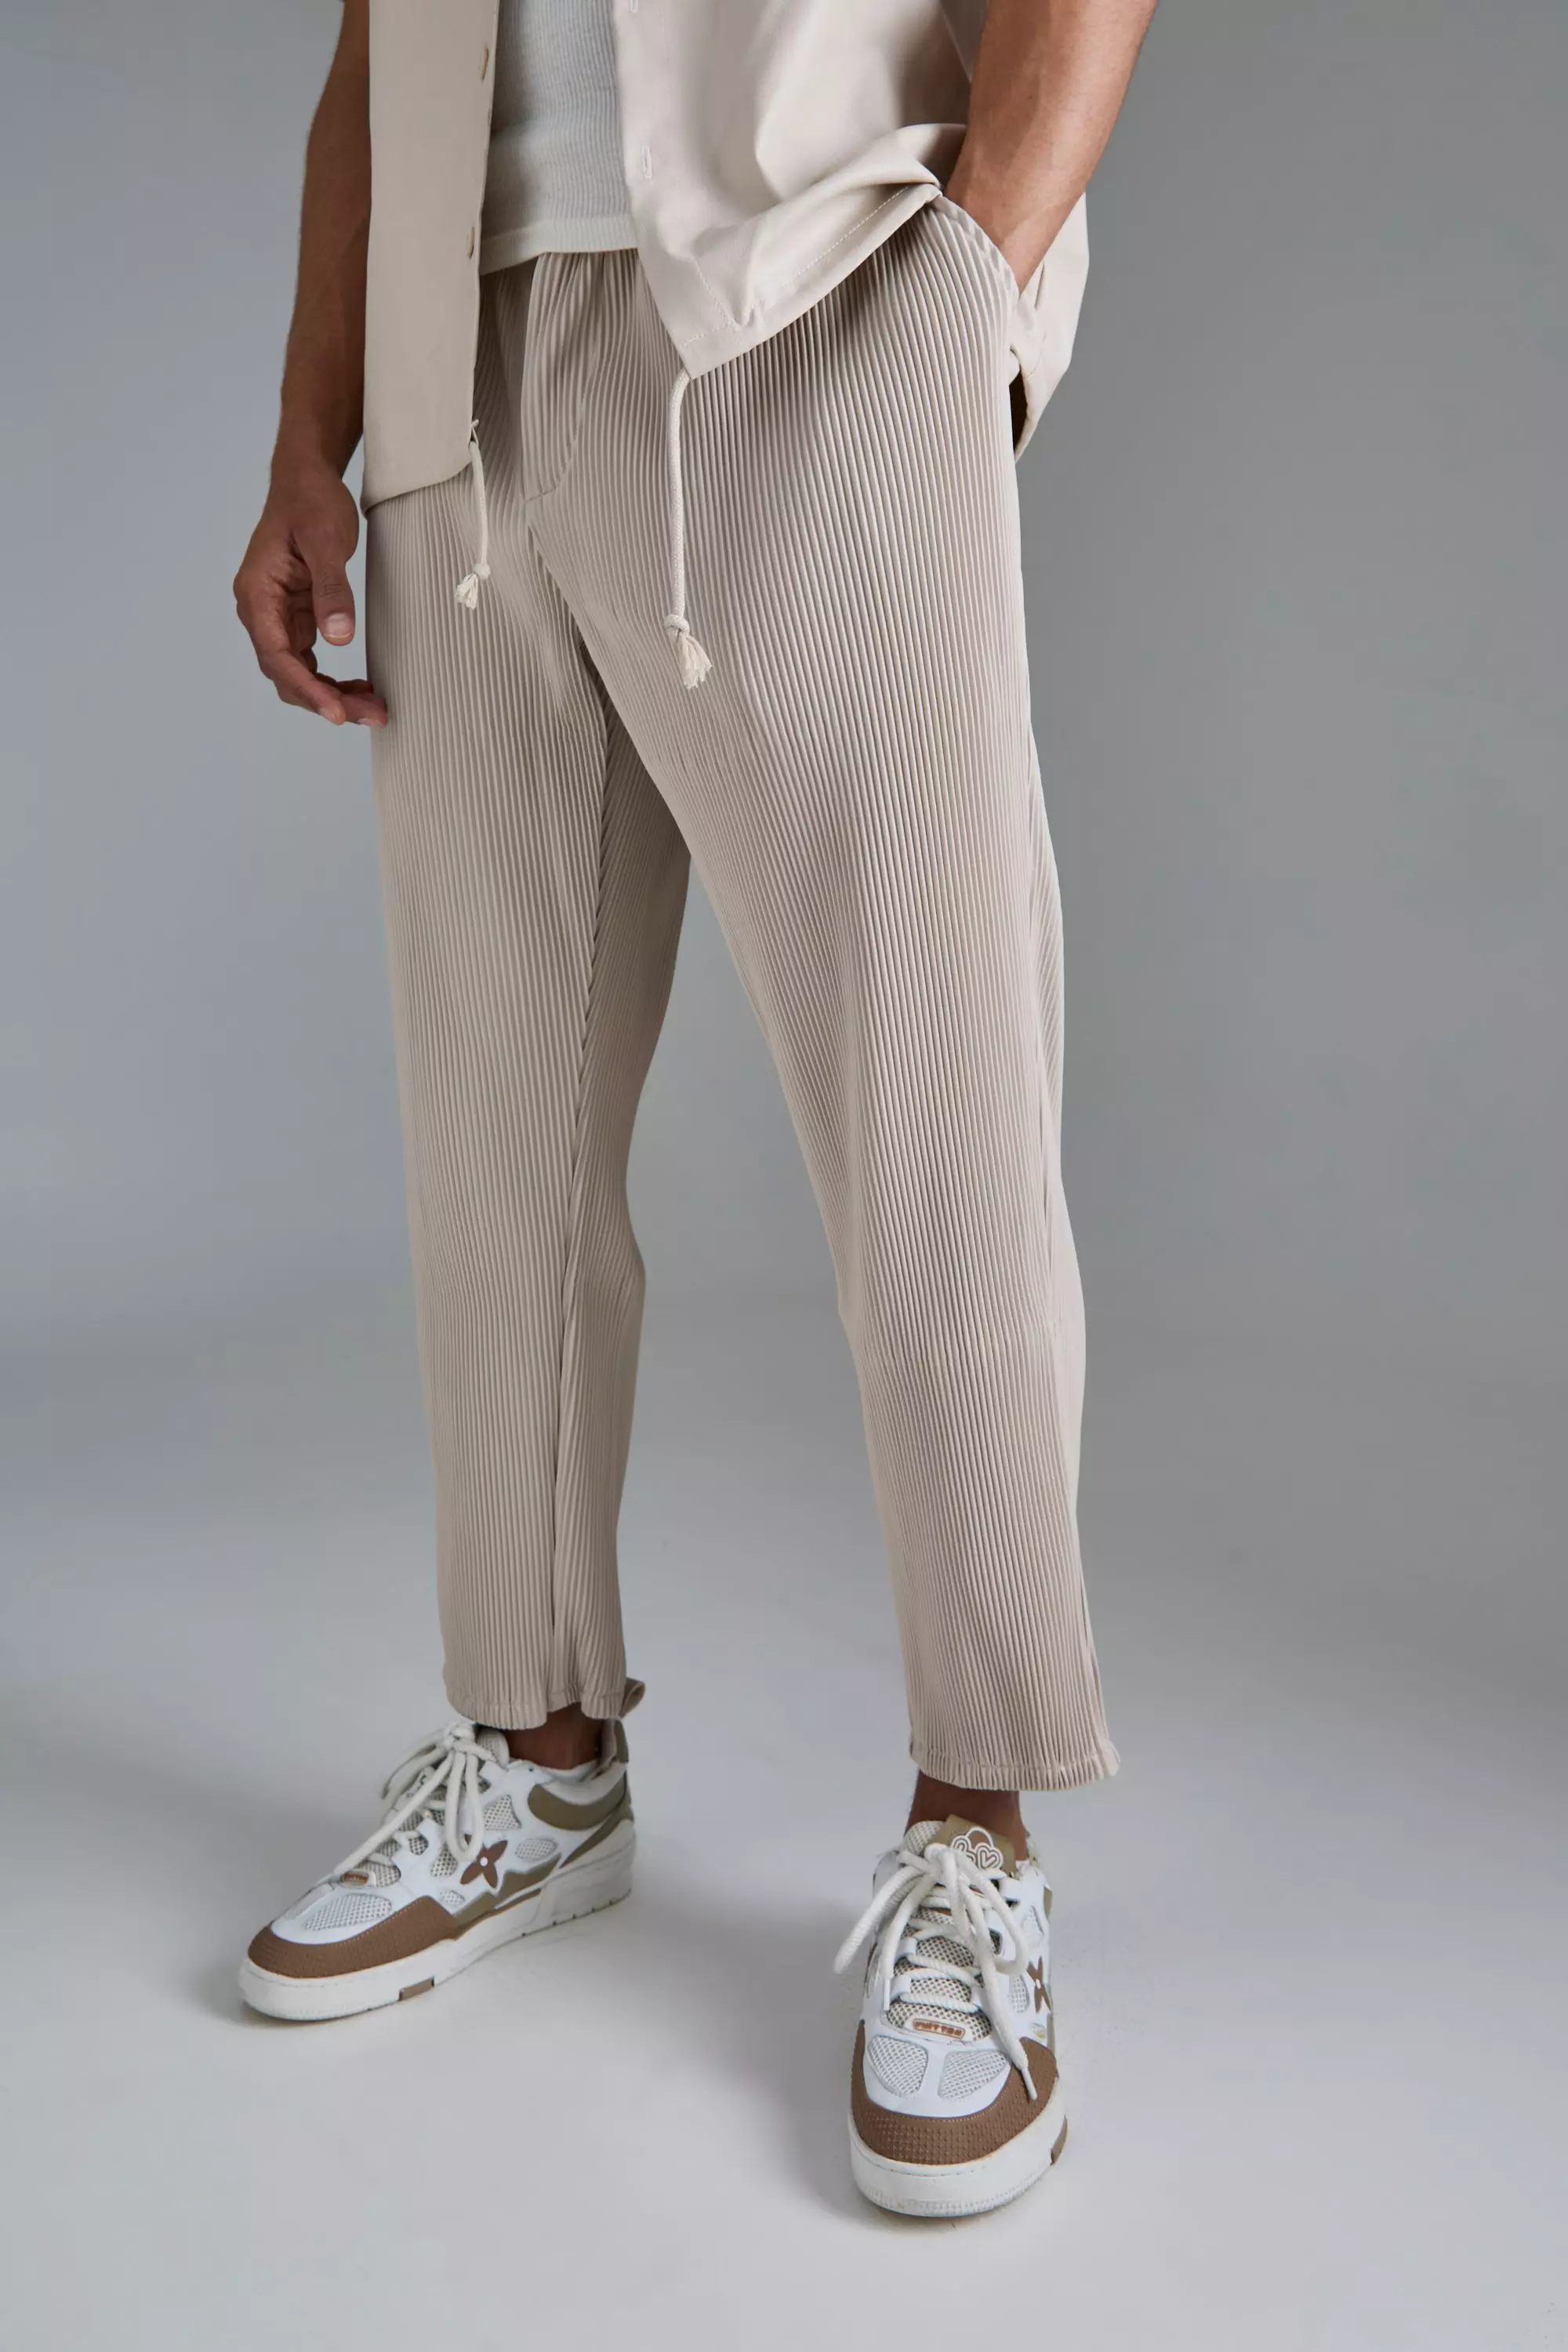 Most Affordable Issey Miyake Pleated Pants Alternative Under $30! 